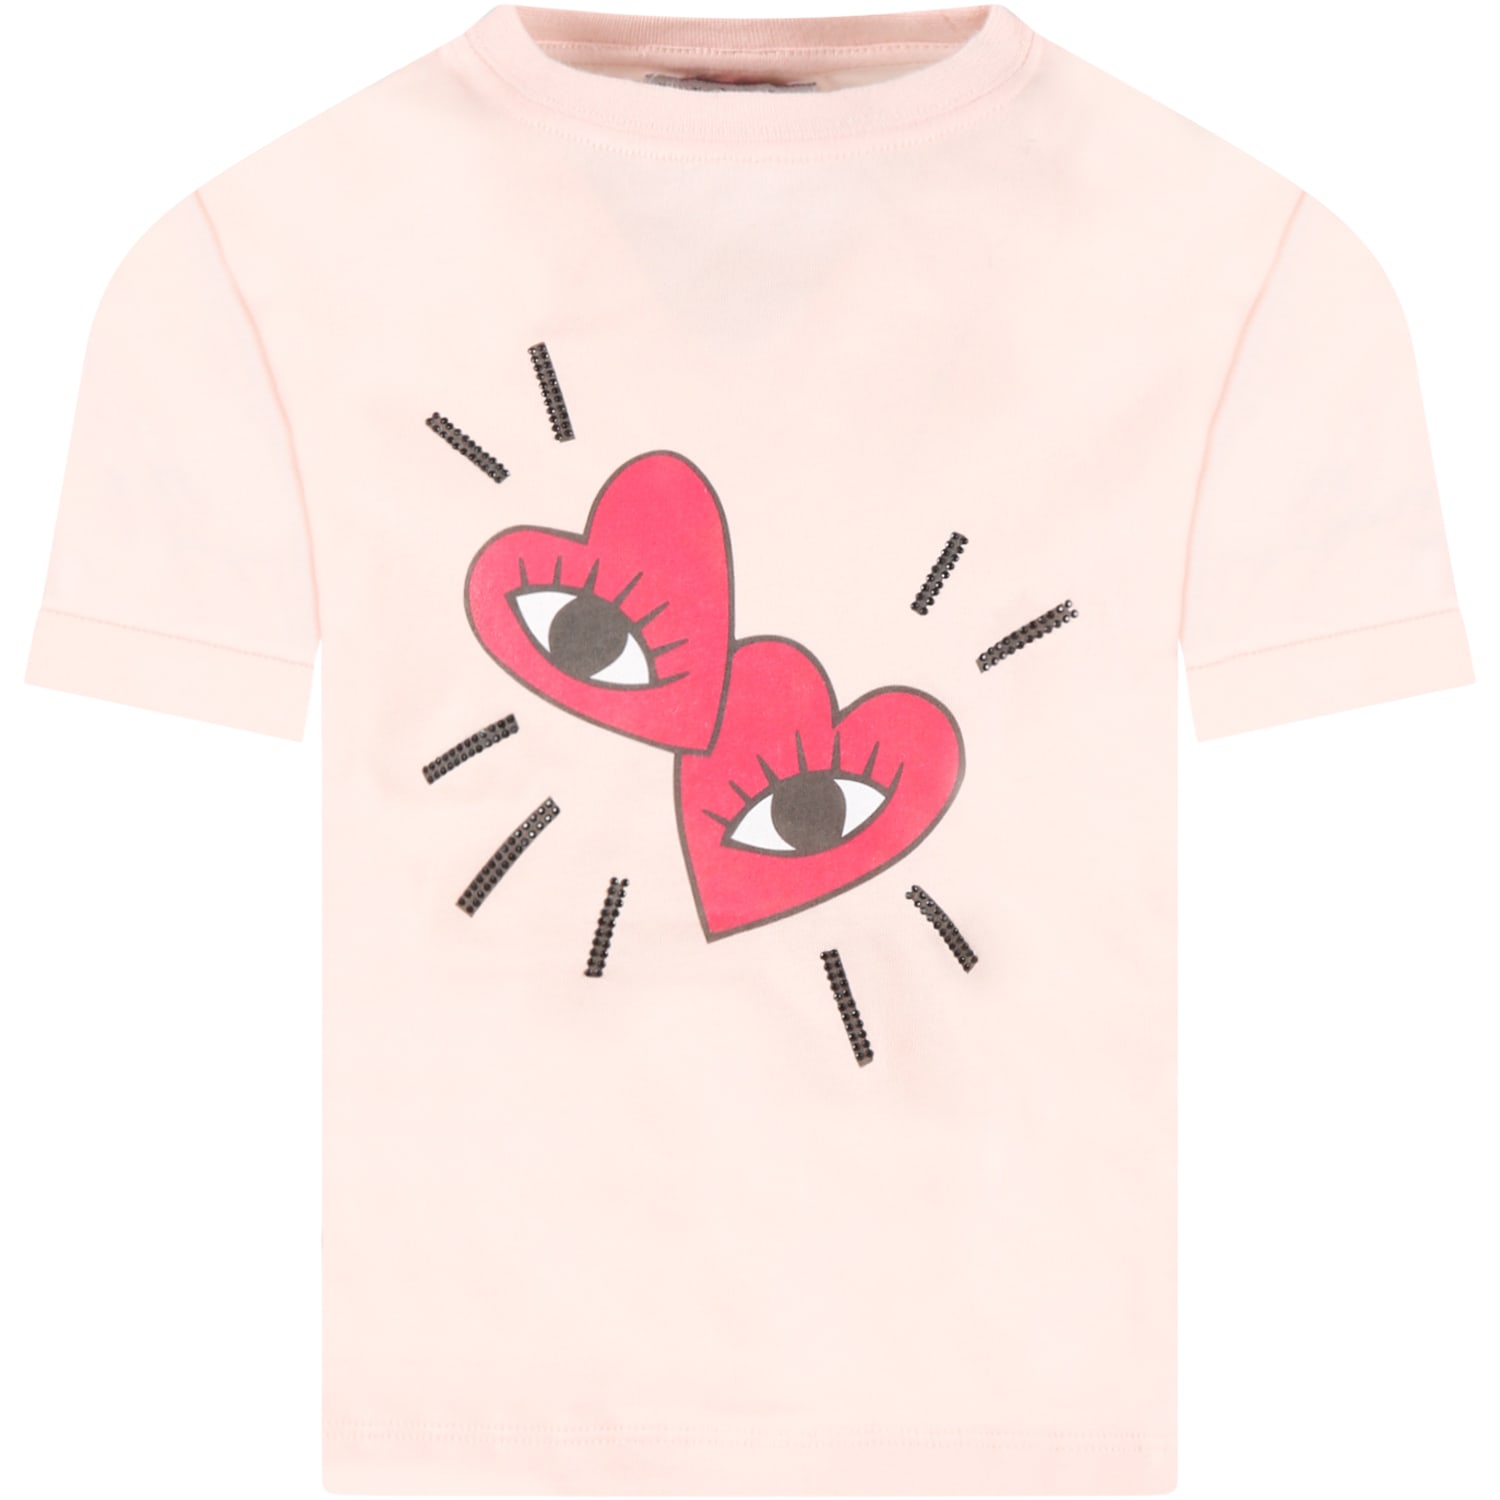 Sonia Rykiel Pink T-shirt For Girl With Hearts